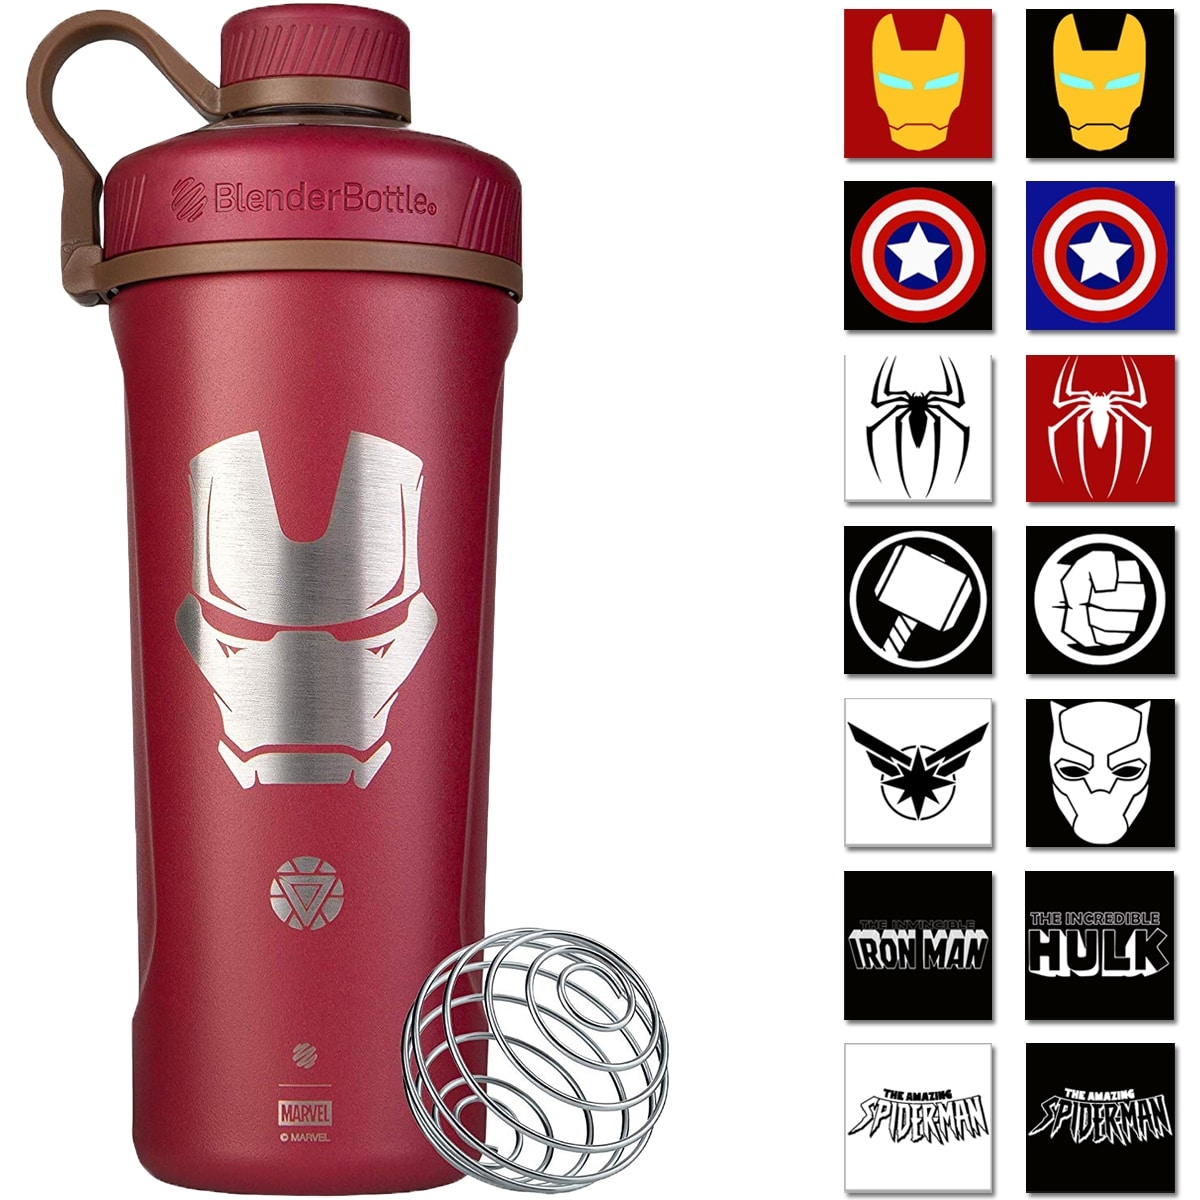 https://ak1.ostkcdn.com/images/products/is/images/direct/87d93d2808822d285439264a5f1147b1099c2a06/Blender-Bottle-Marvel-Radian-26-oz.-Insulated-Stainless-Steel-Shaker-Cup.jpg